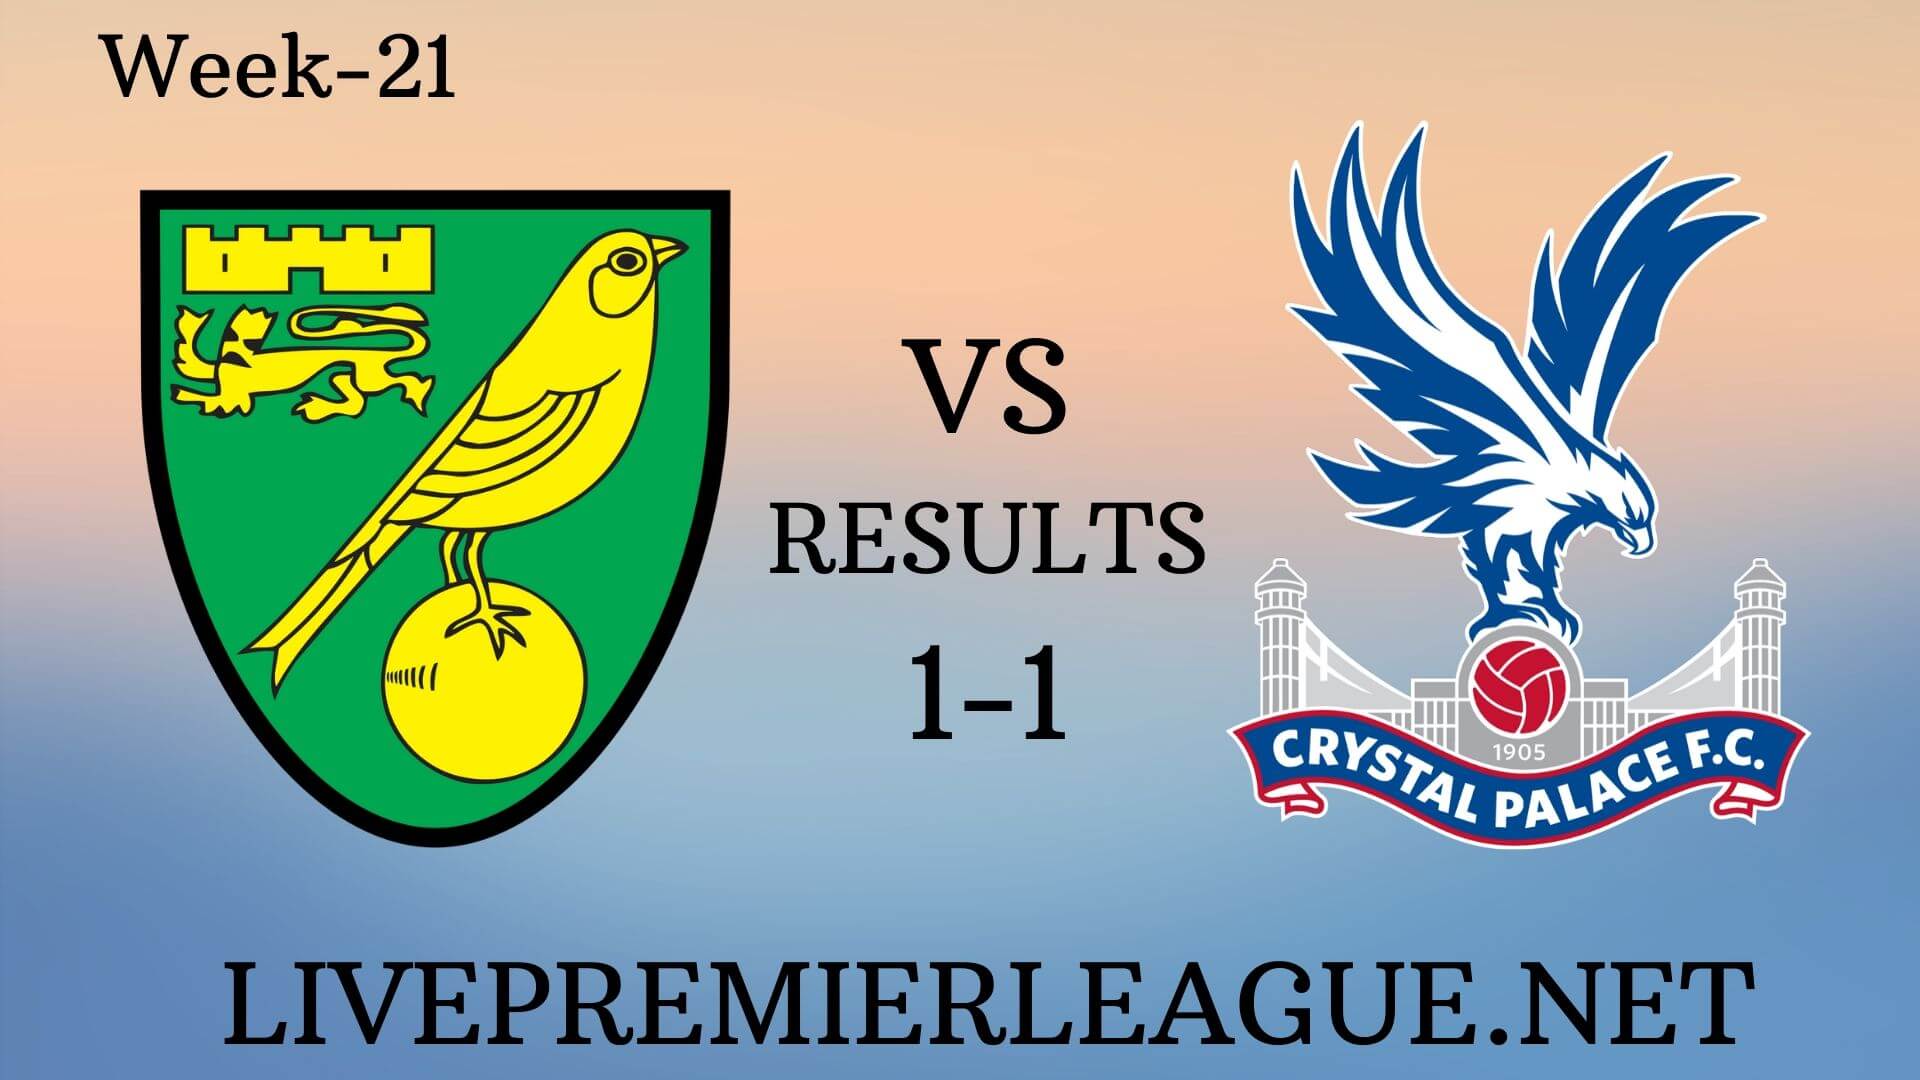 Norwich City Vs Crystal Palace | Week 21 Result 2019